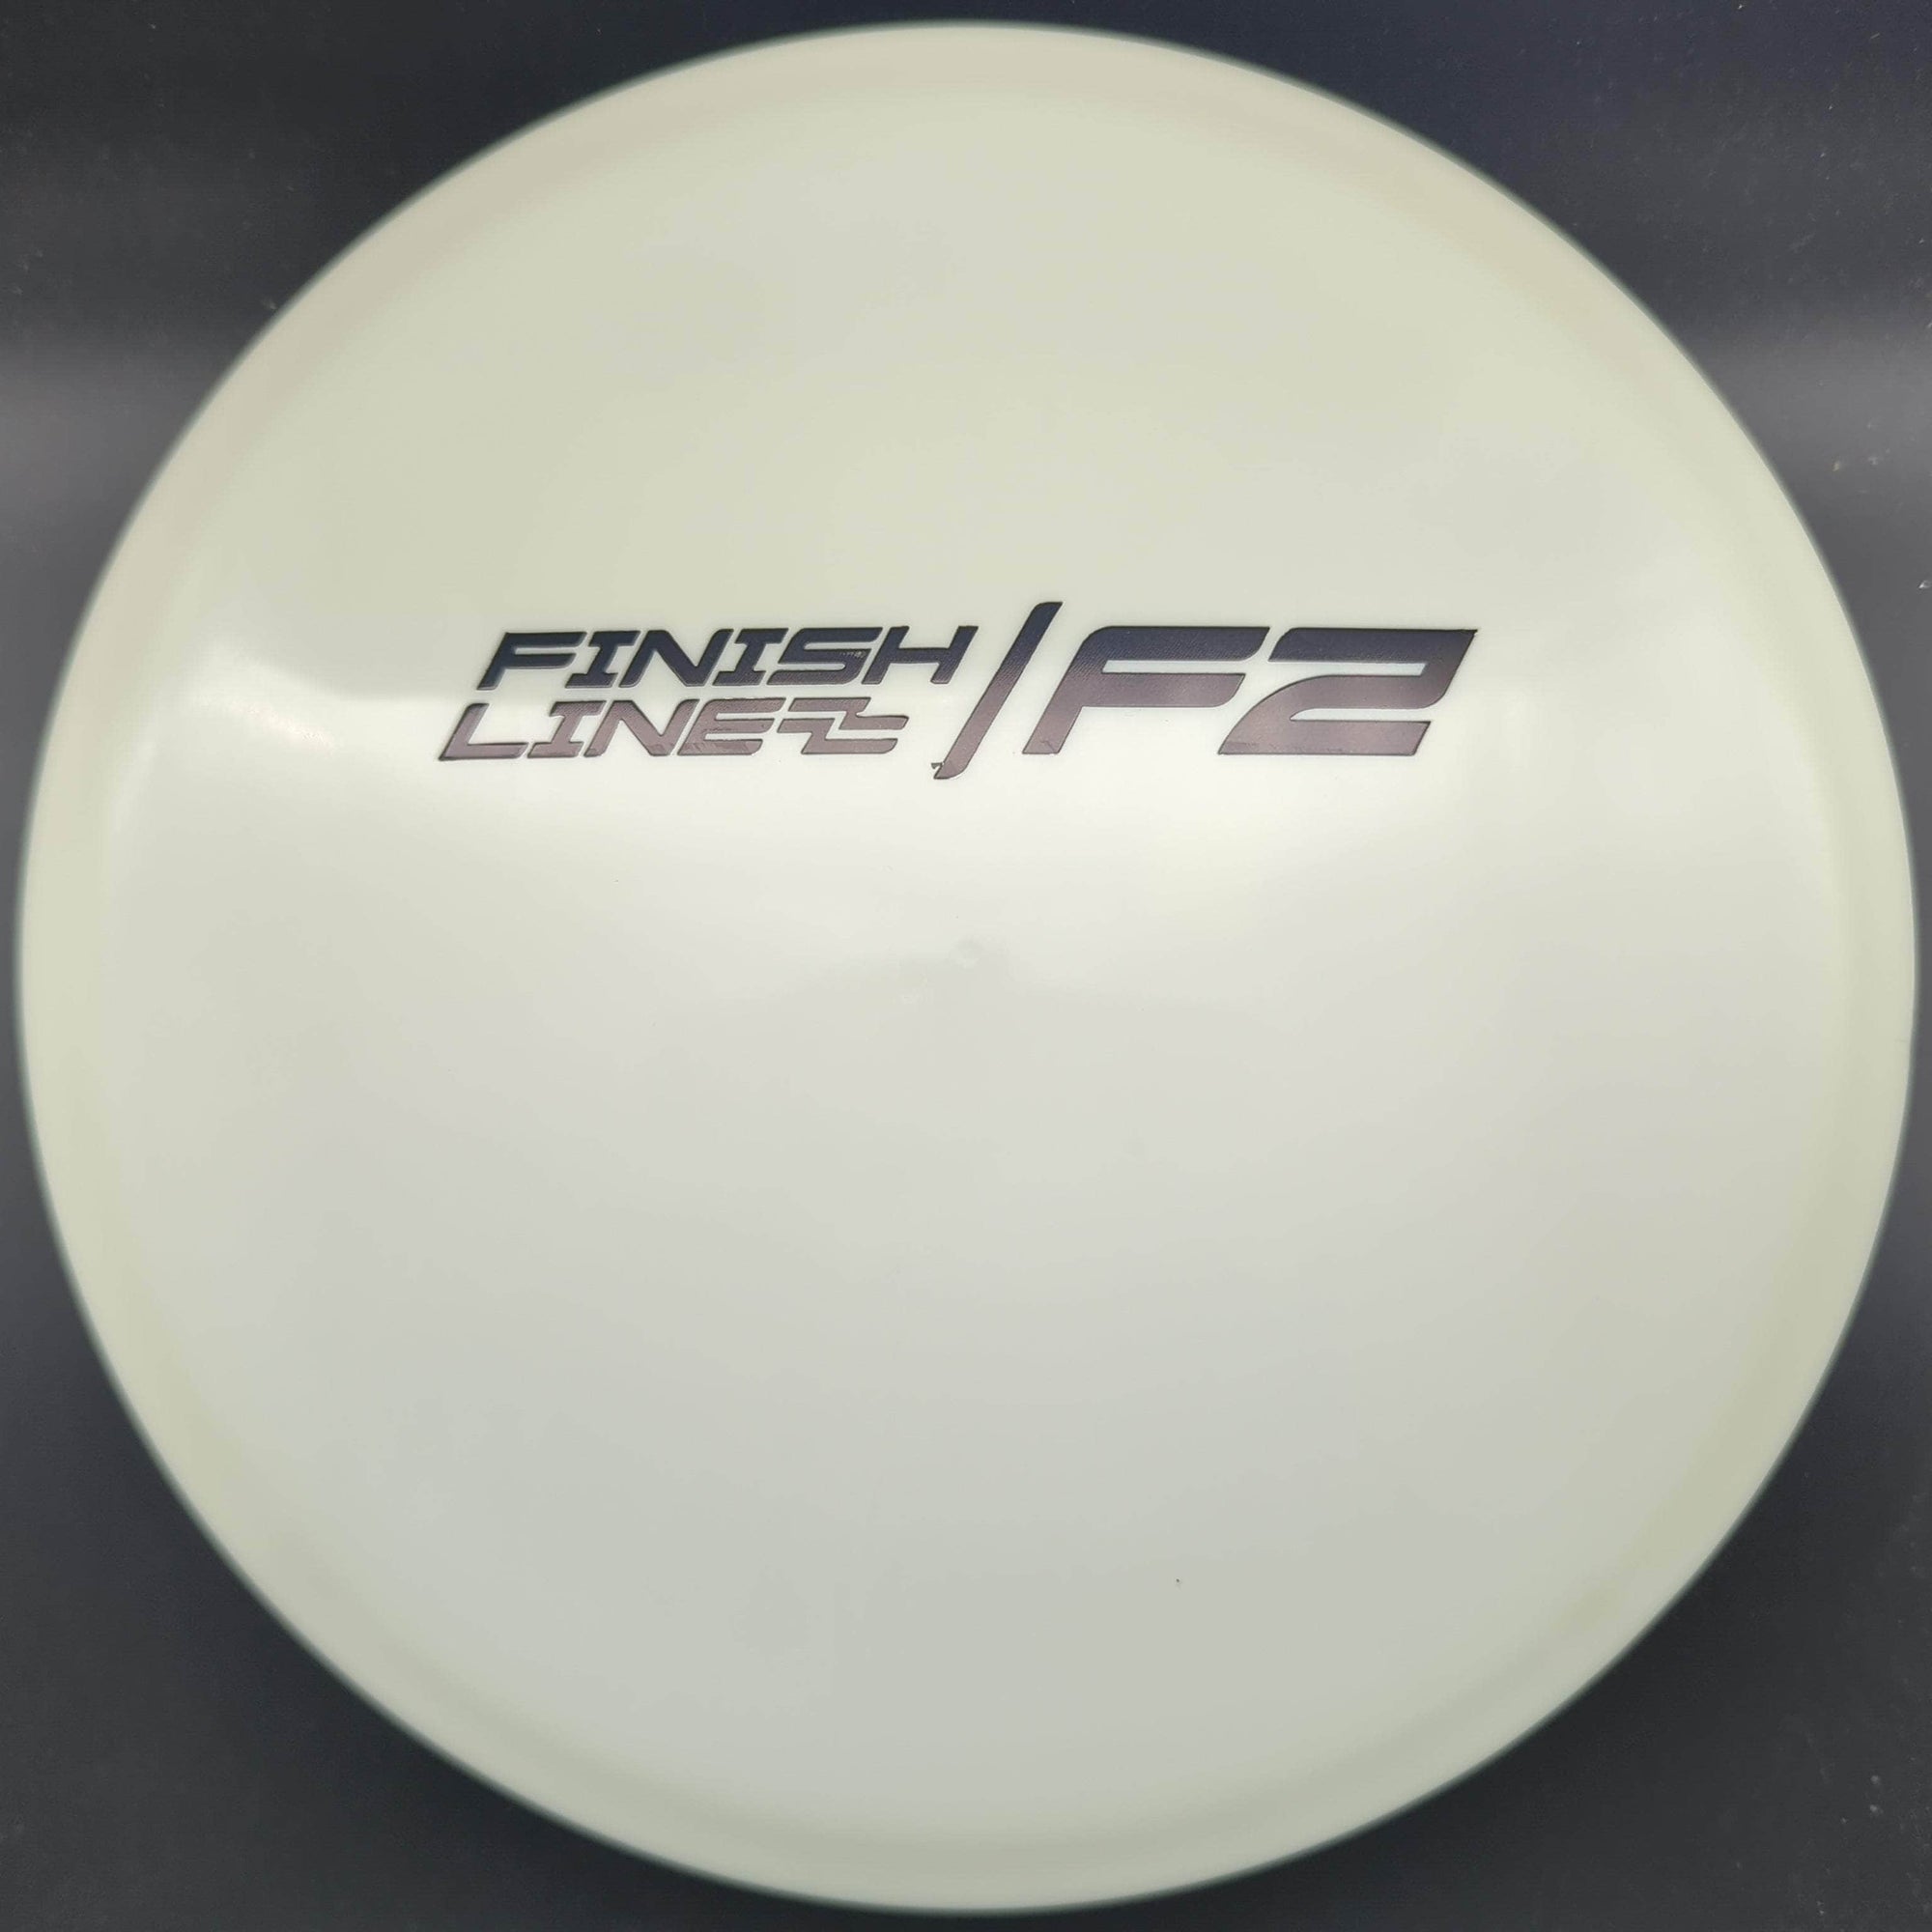 Finish Line Distance Driver White Black Stamp 178g Supra, Forged Plastic, Factory Second